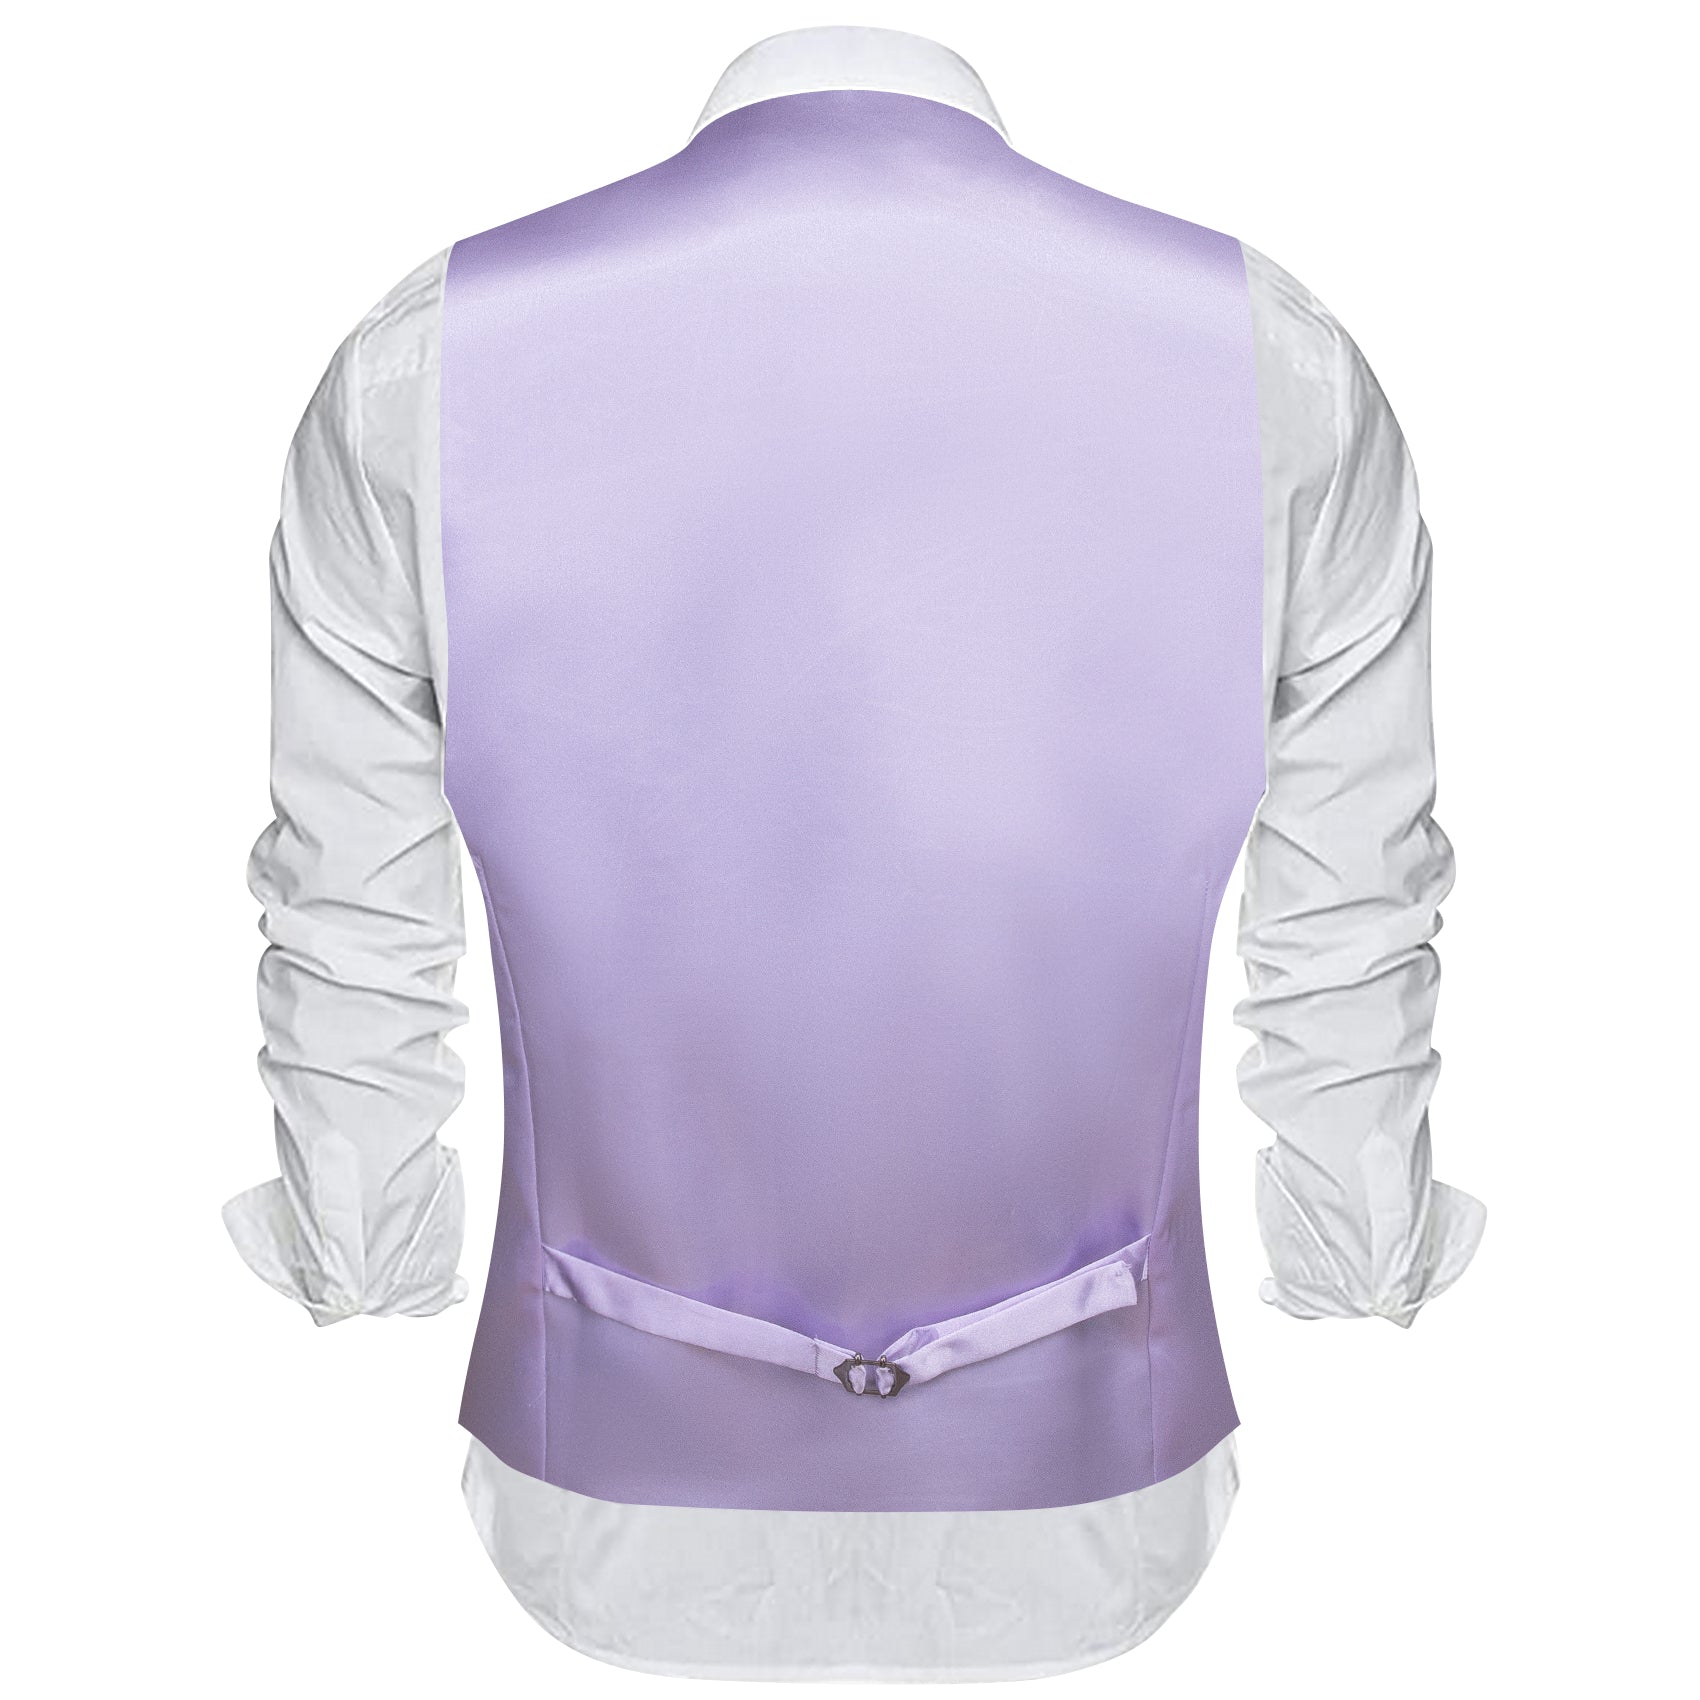 Purple Solid Silk Waistcoat Vest for Party